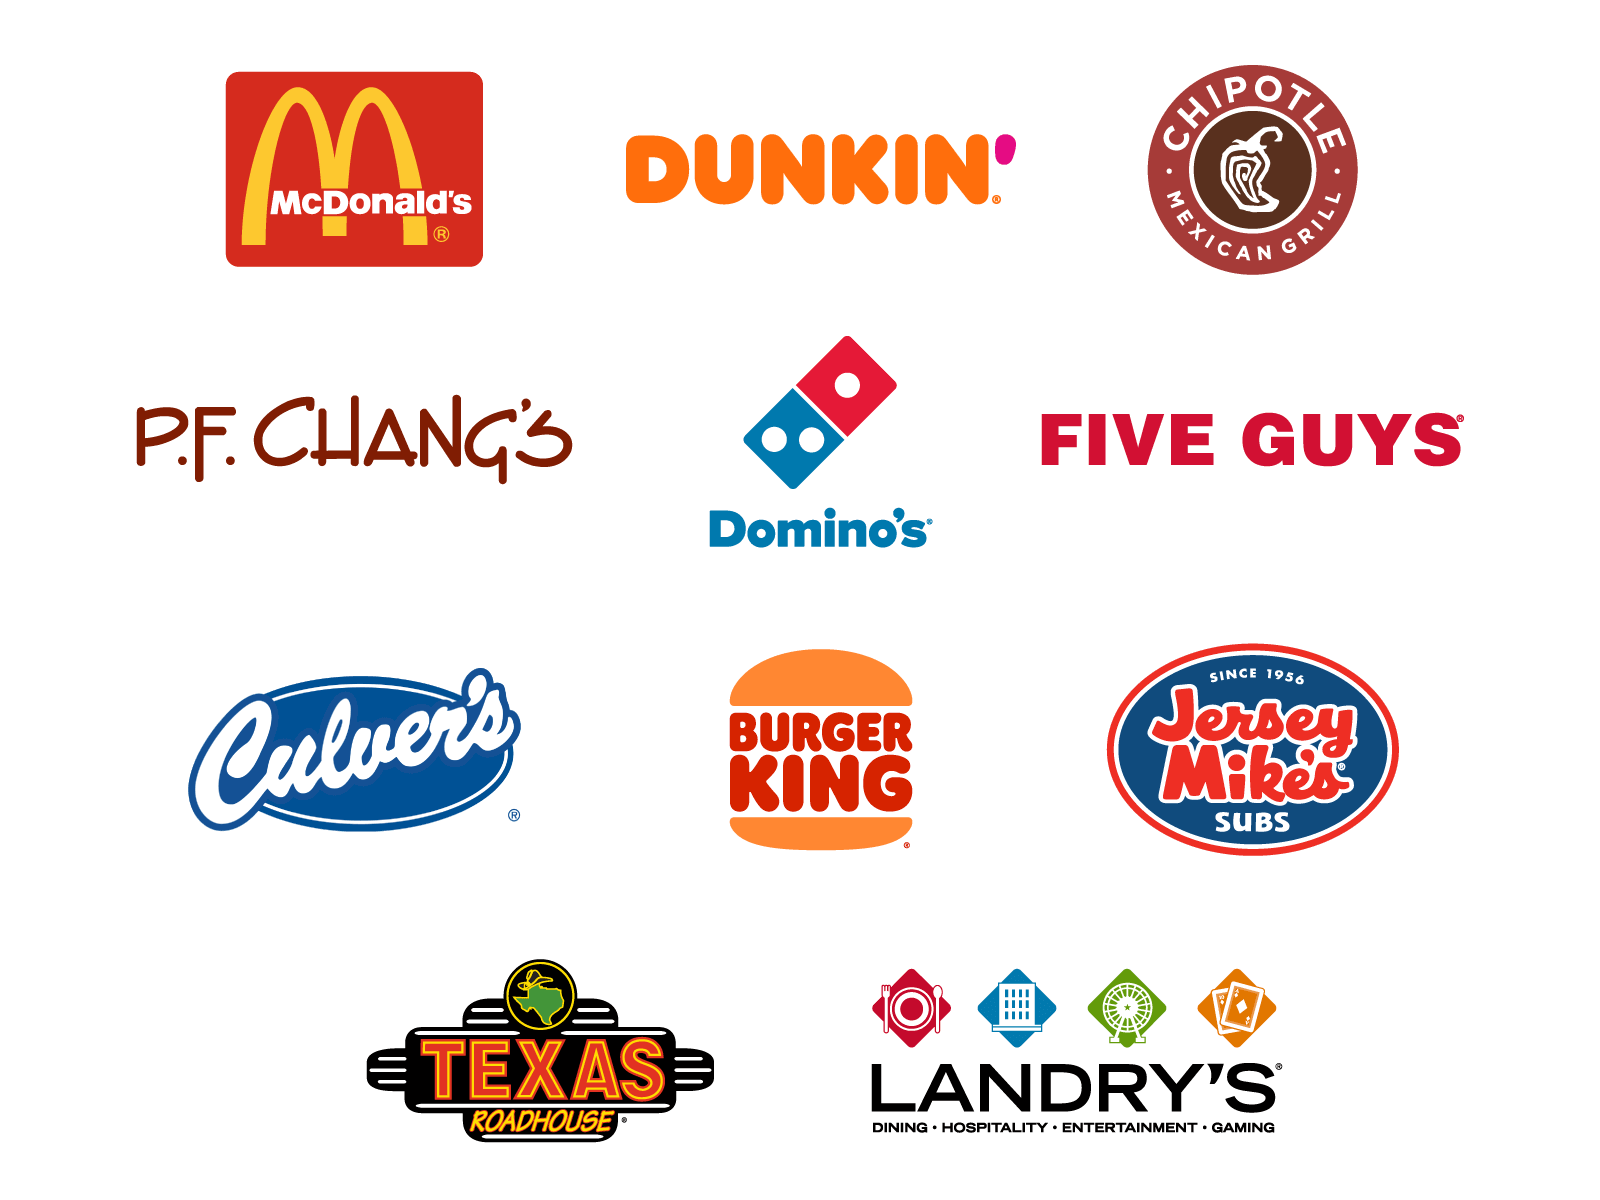 Crunchtime Customer Logos McDonalds Dunkin Chipotle P.F. Changs Domino's Five Guys Culver's Burger King Jersey Mike's Texas Roadhouse Landry's